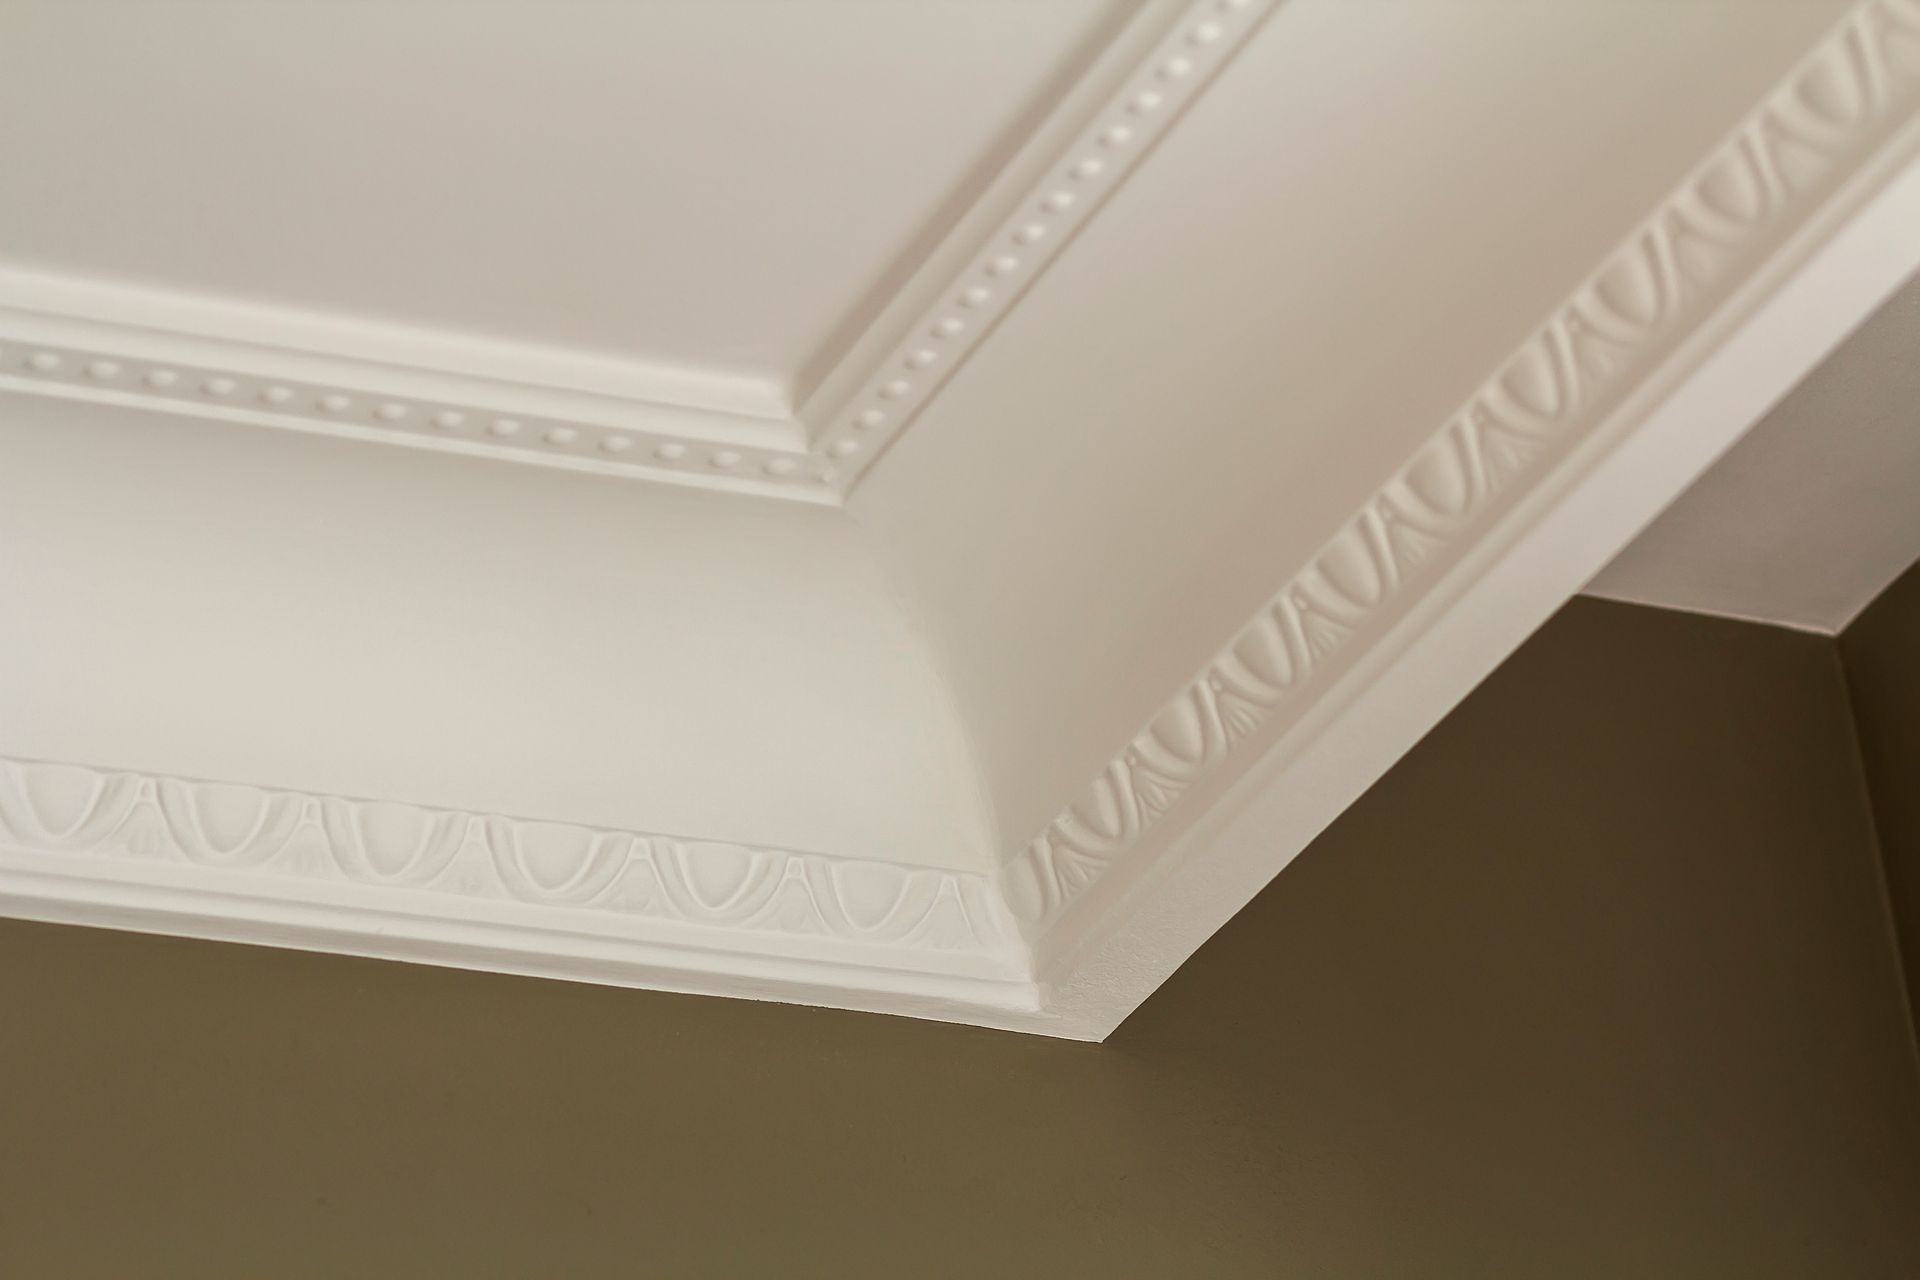 Close-up detail of ornamental white crown molding painted on the ceiling of a white room, adding a decorative touch.